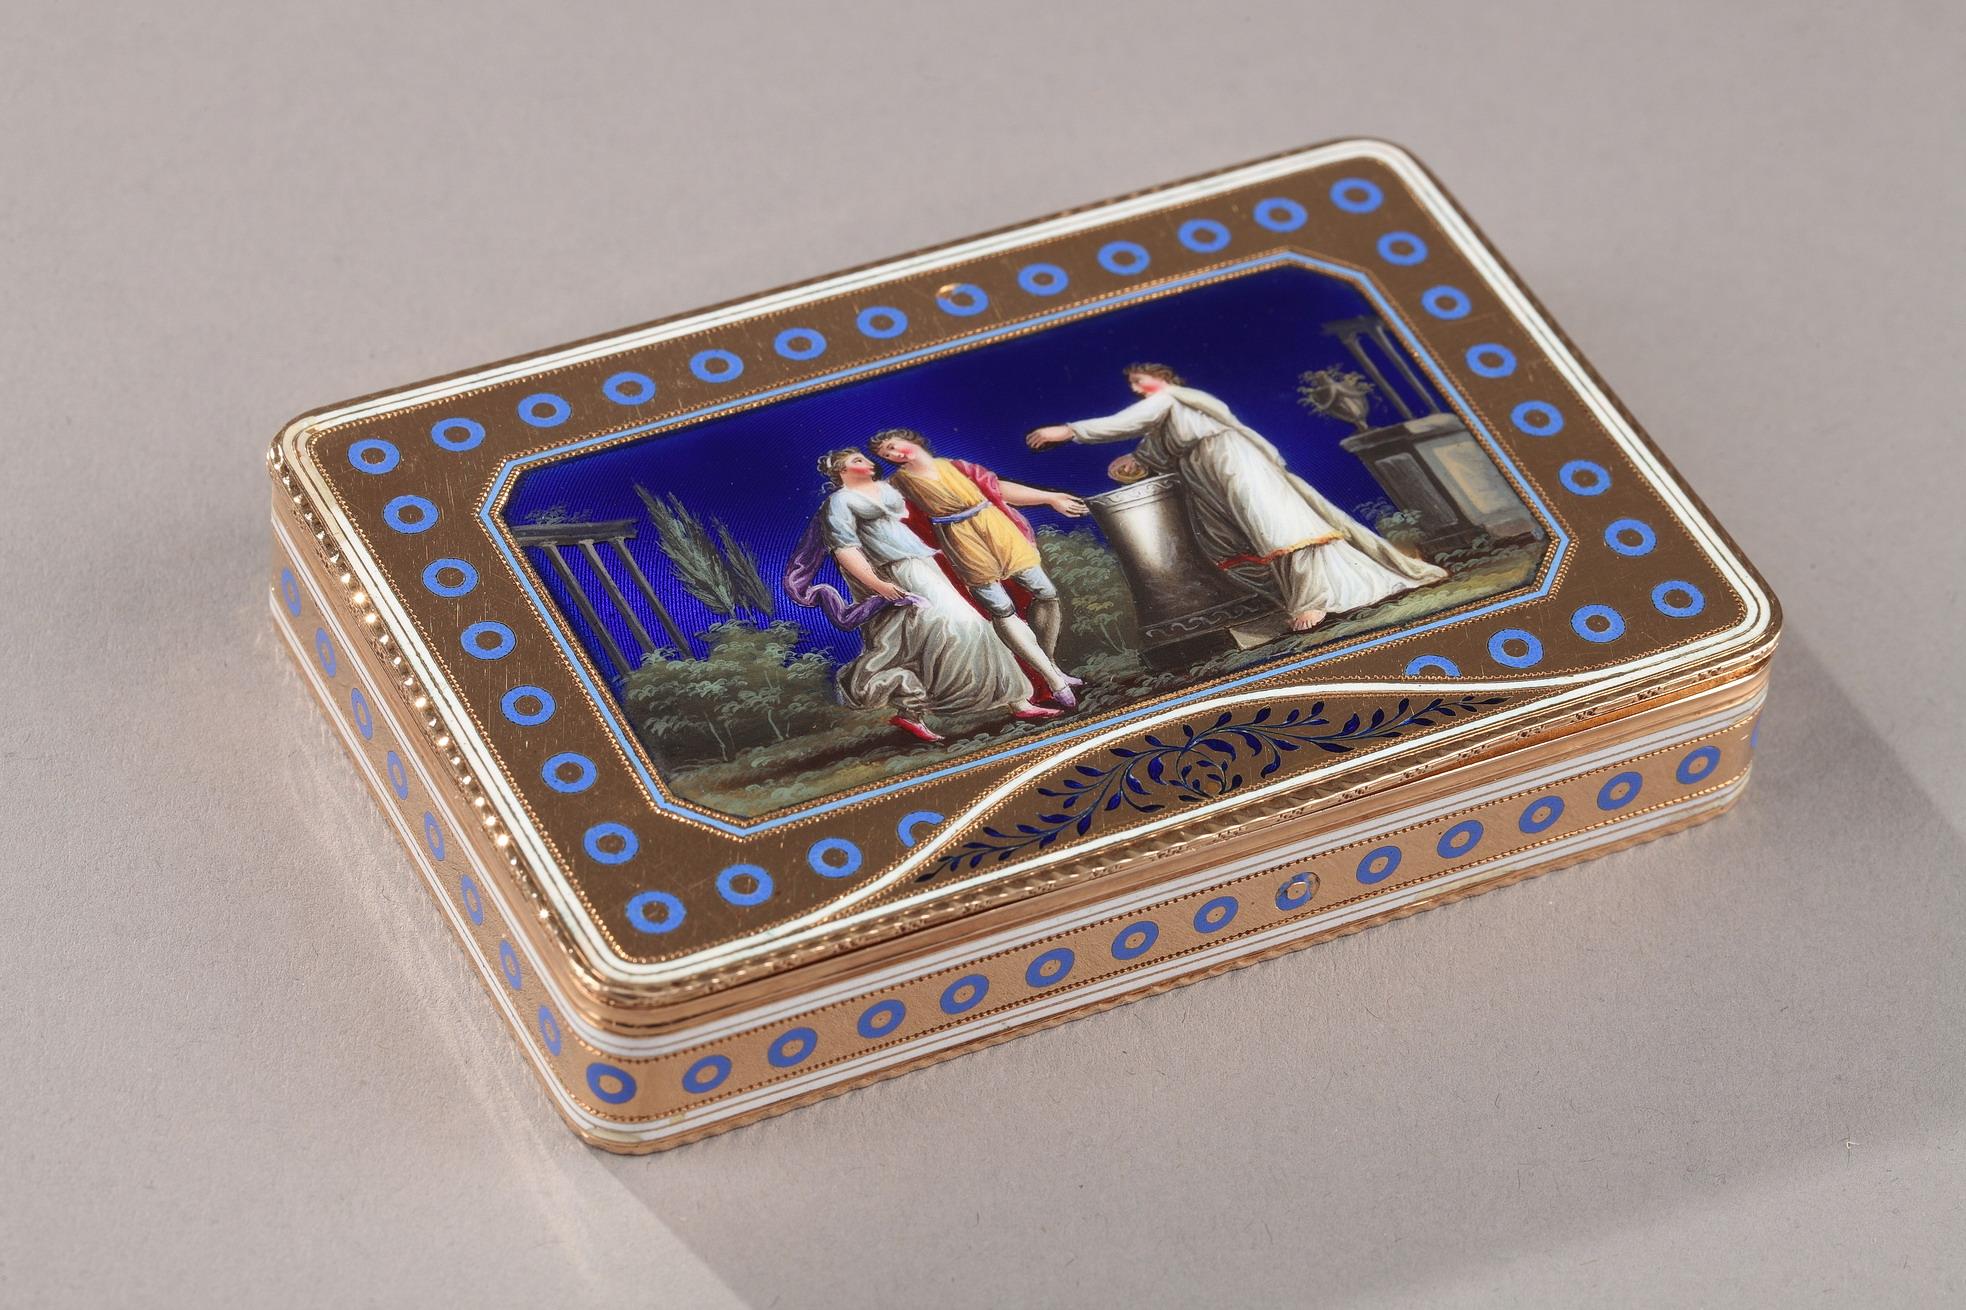 Rectangular enamelled gold box. The hinged lid is decorated with a scene of young people dressed in neoclassical clothing and approaching near an altar where officiates a person dressed in the antique. The background presents a landscape decorated